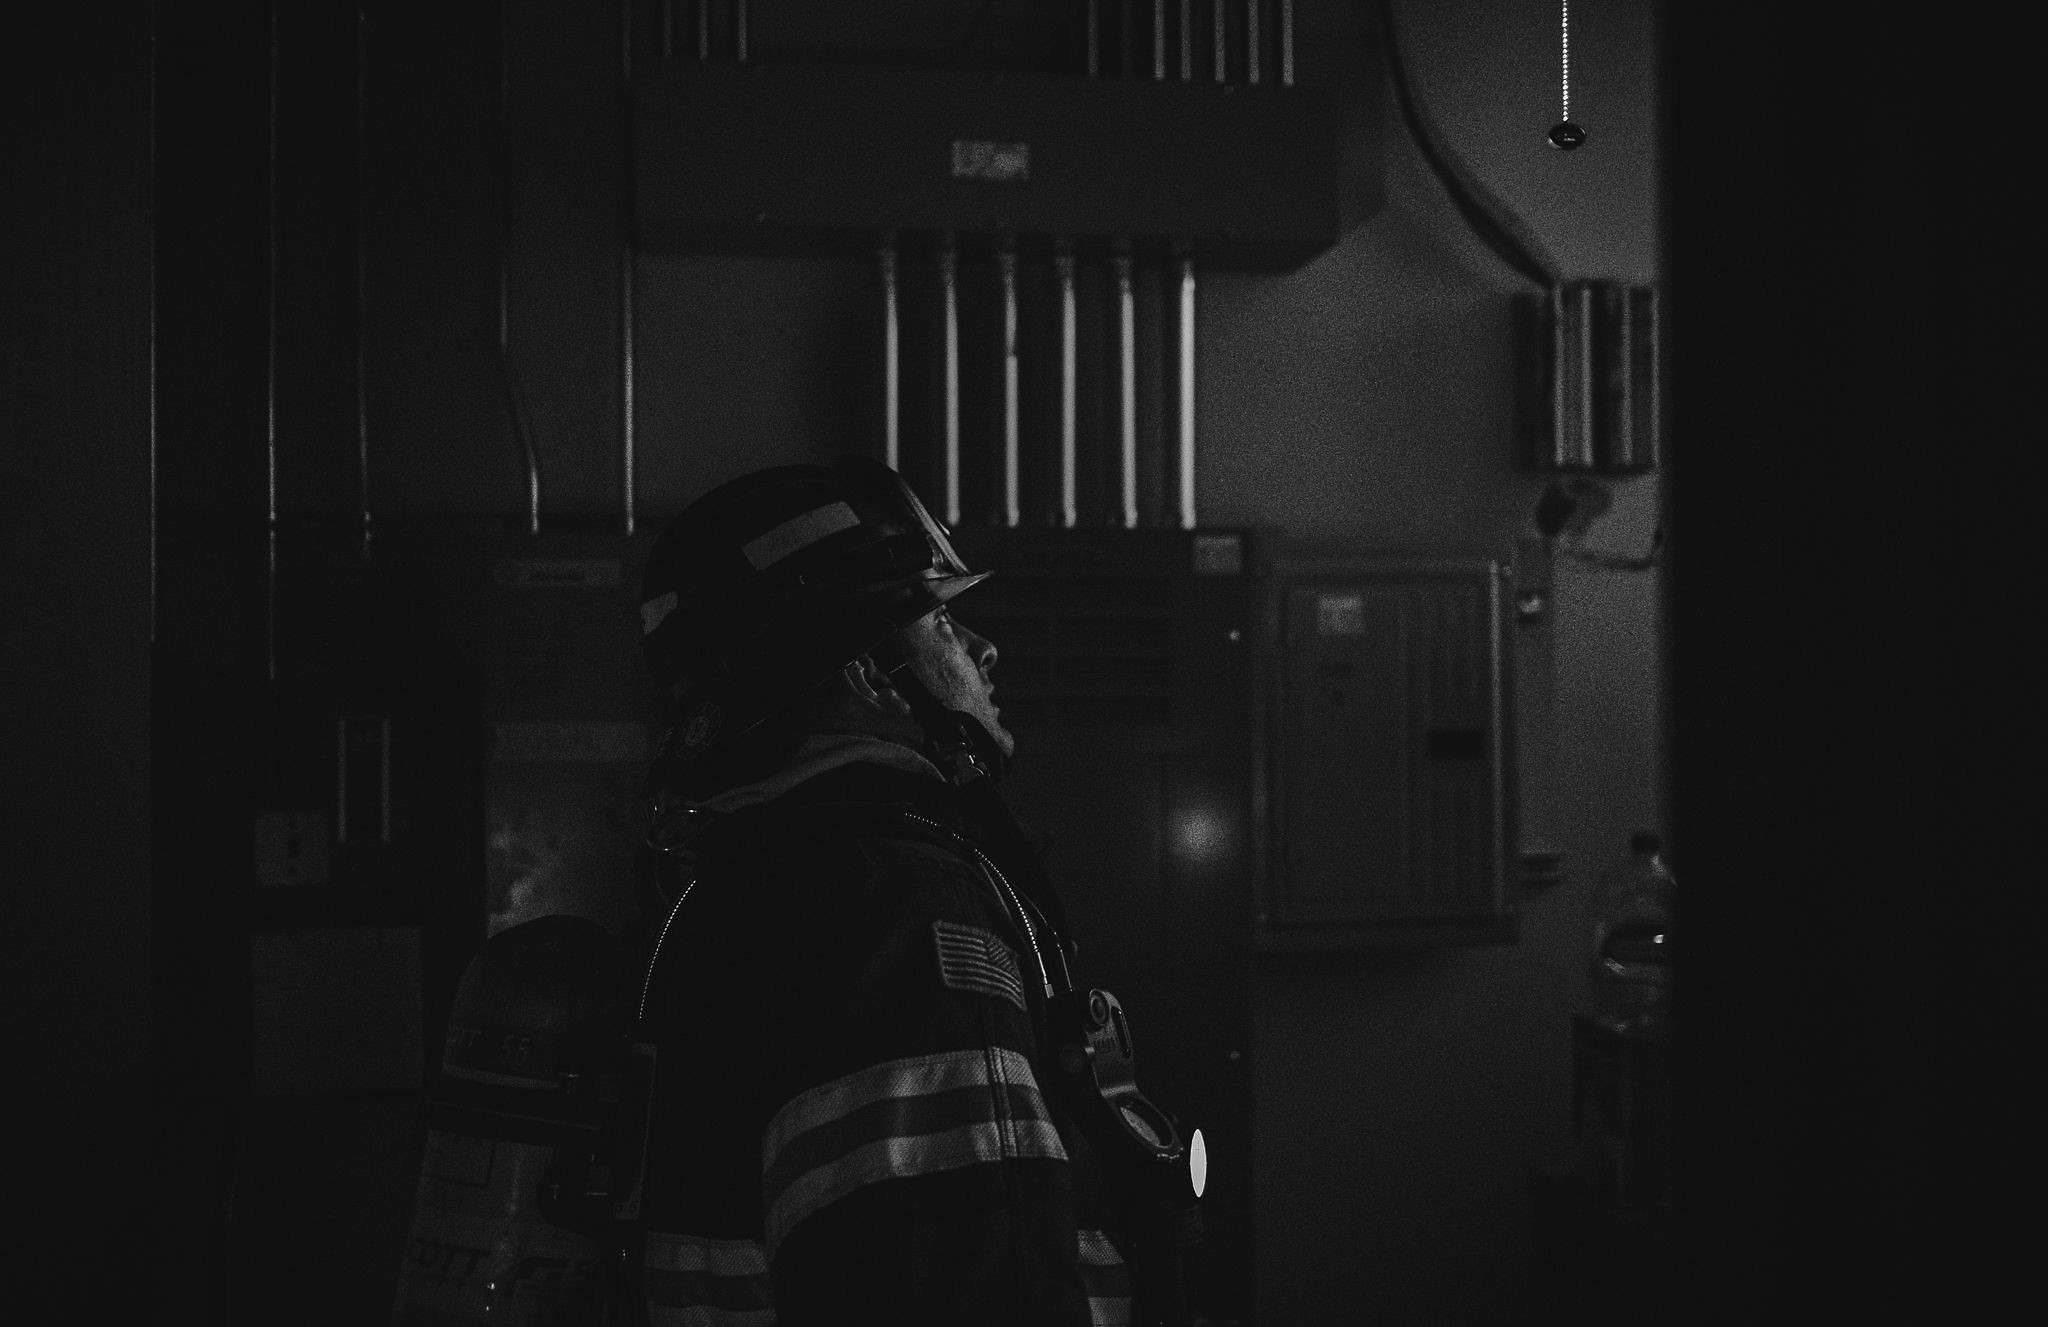 An impactful black and white photo capturing a firefighter in the heroic act of service in a dark room.